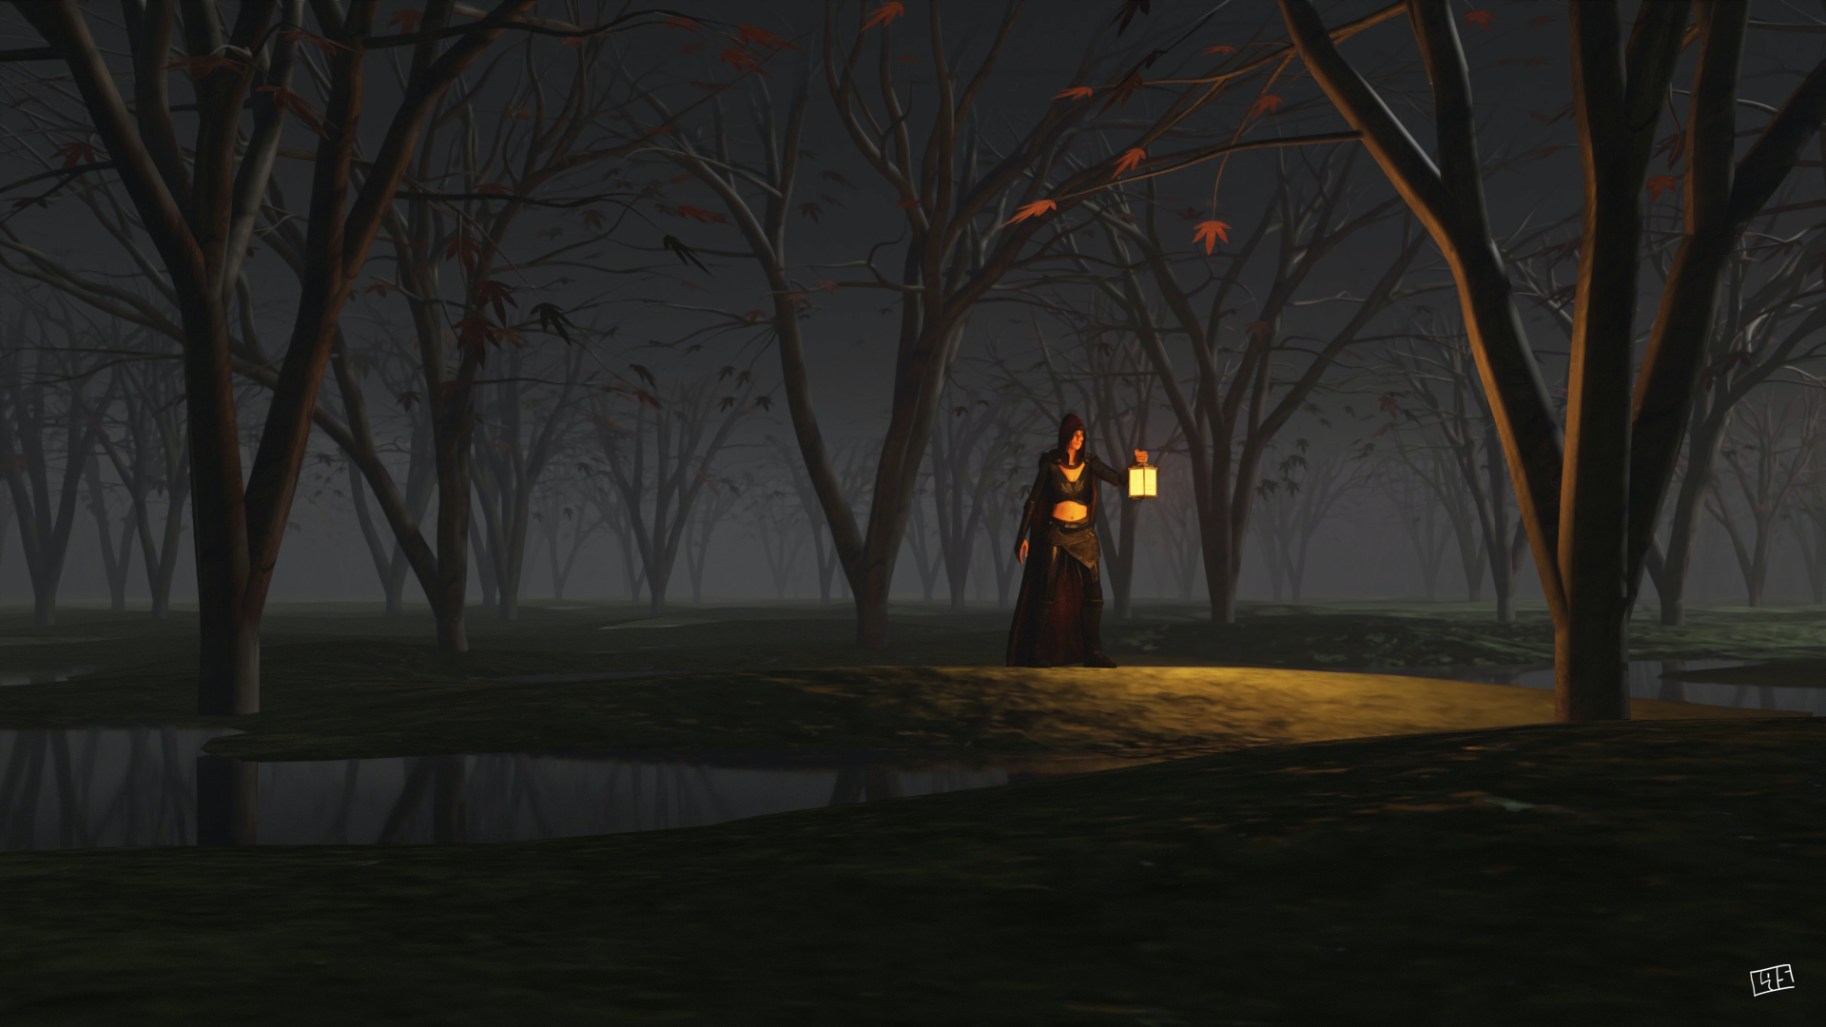 An illustrated scene of a cloaked figure holding an old lamp in a foggy maple grove